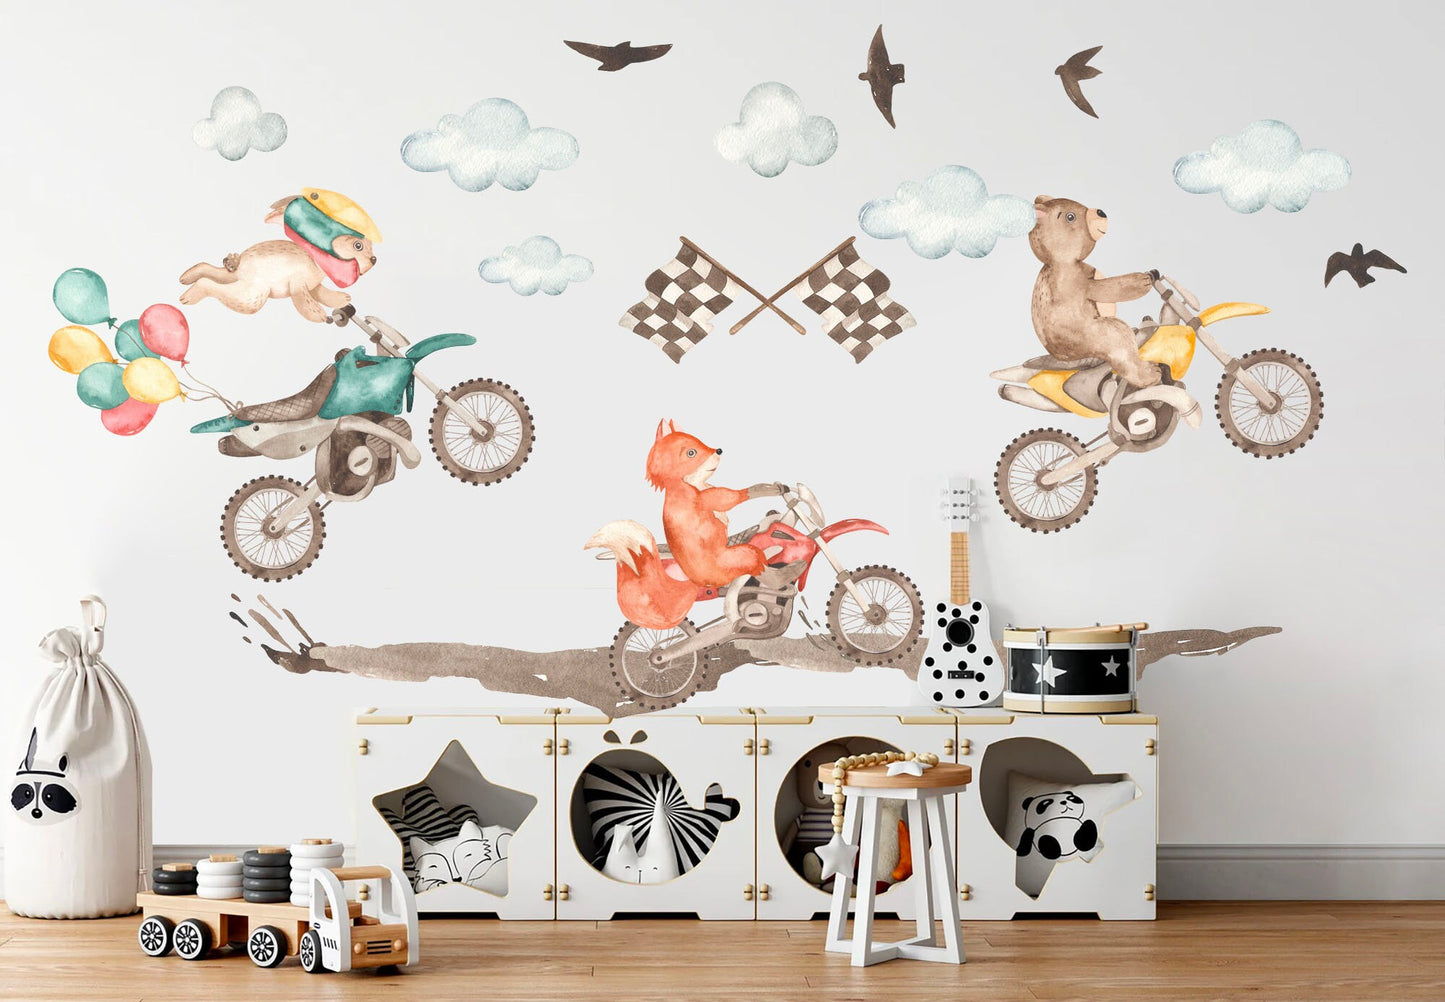 Animal on Moto-X Stunt Off-Road Dirt Bikes Removable Wall Decal Sticker - Boys Room Gift - BR294